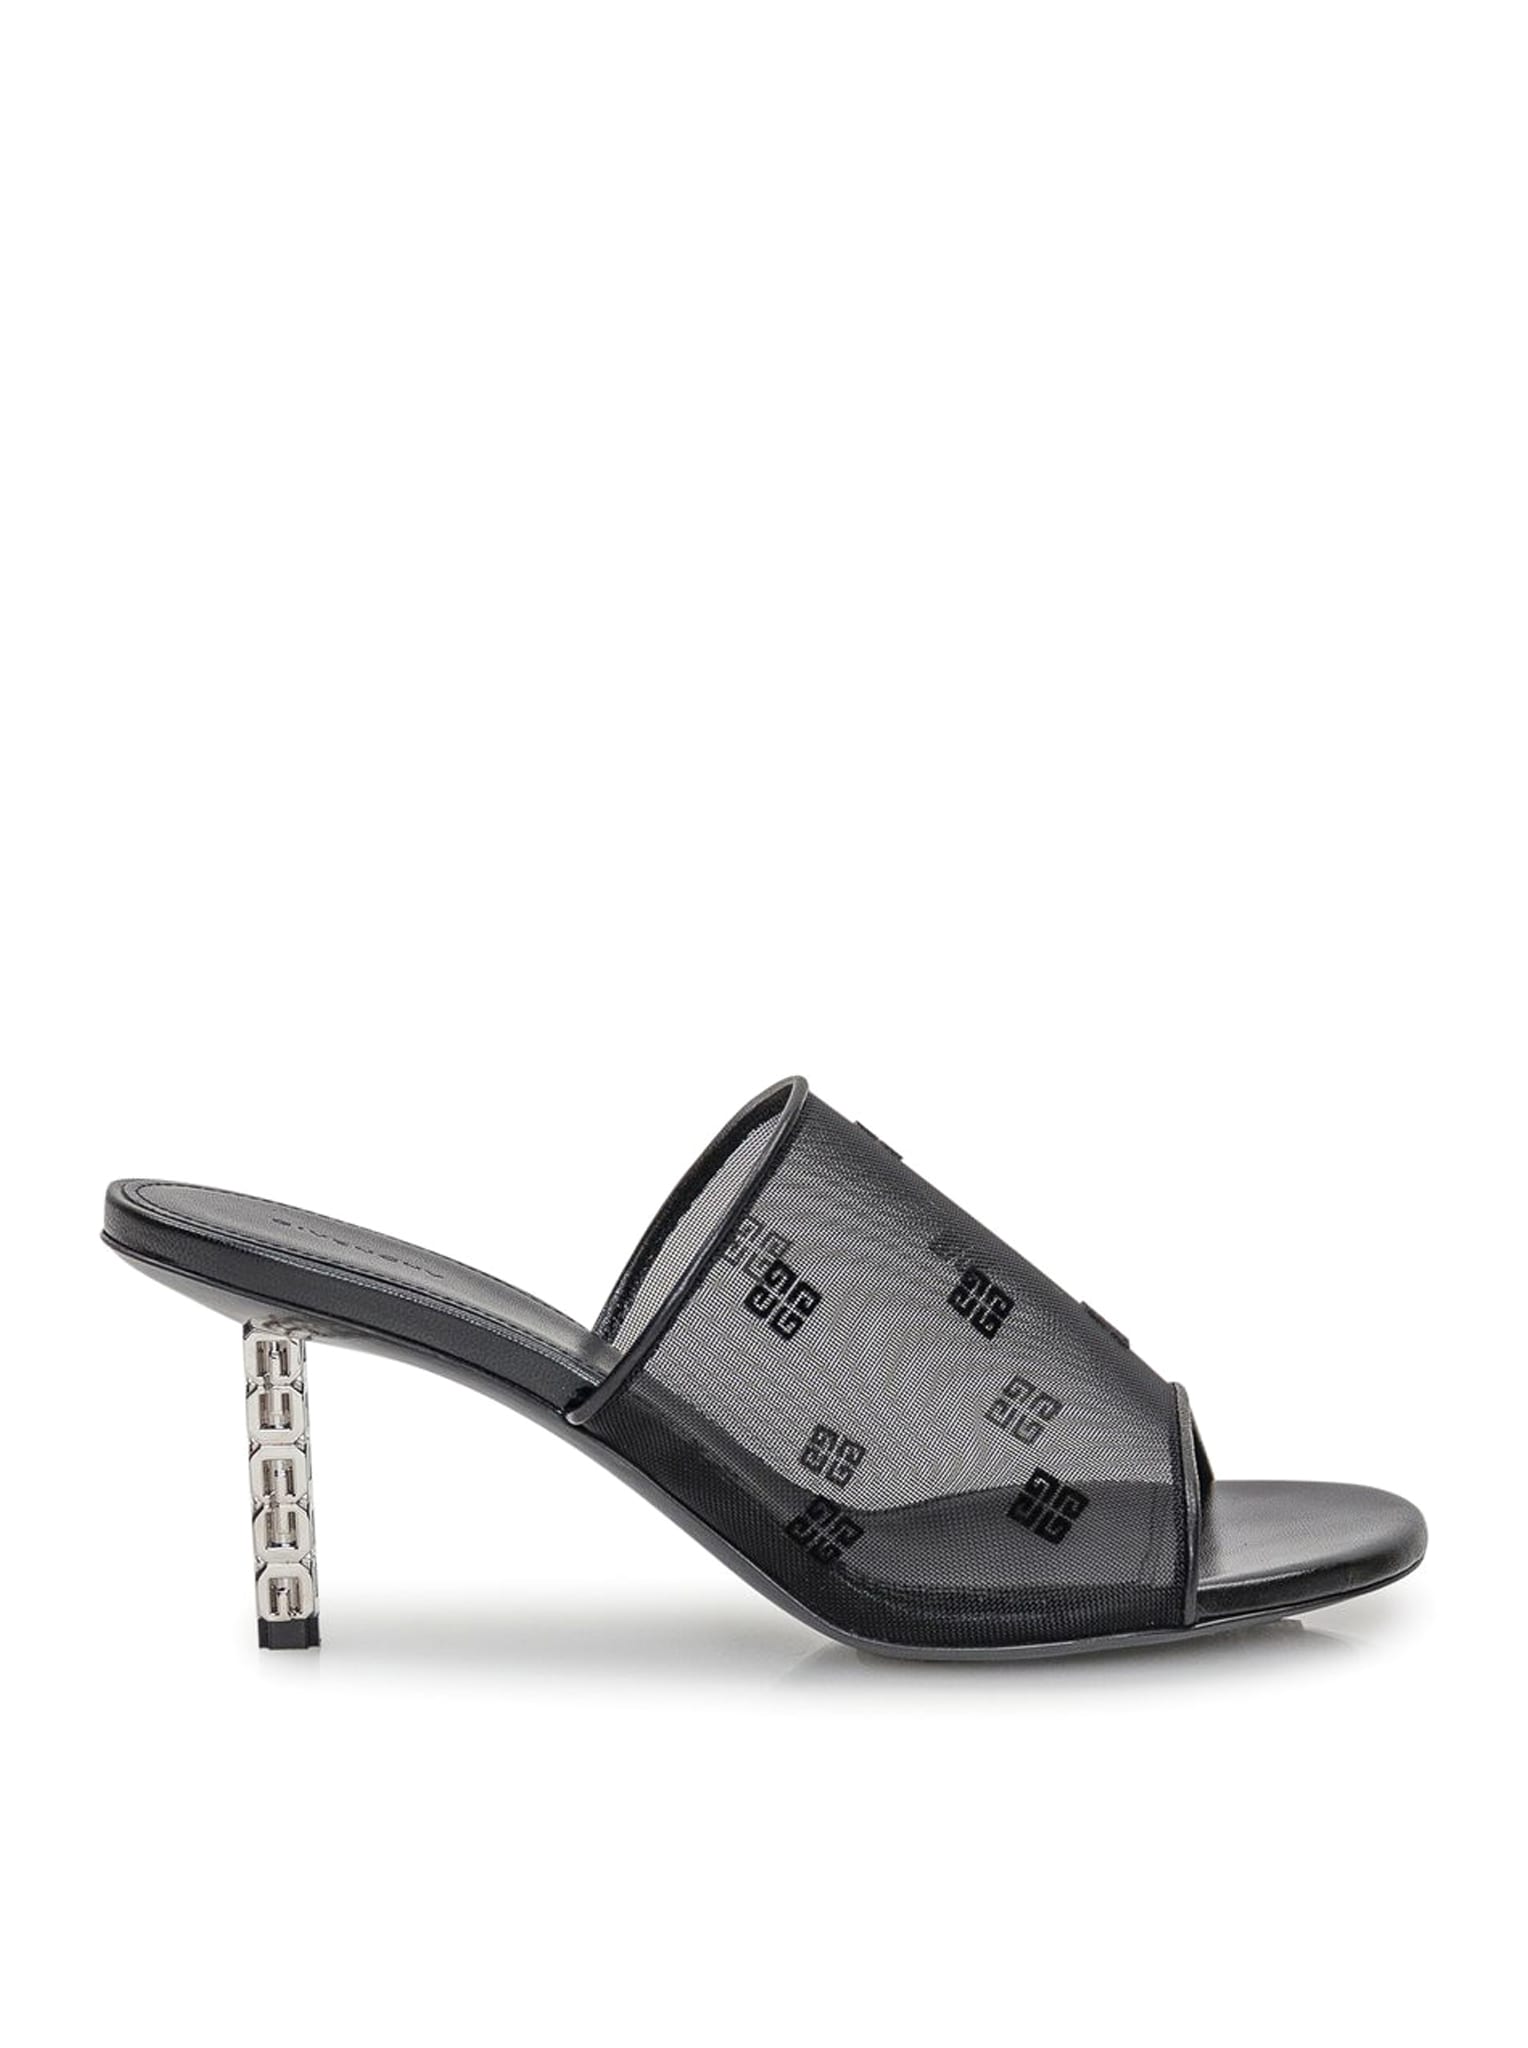 GIVENCHY G CUBE MULES SLIM HEEL 70MM